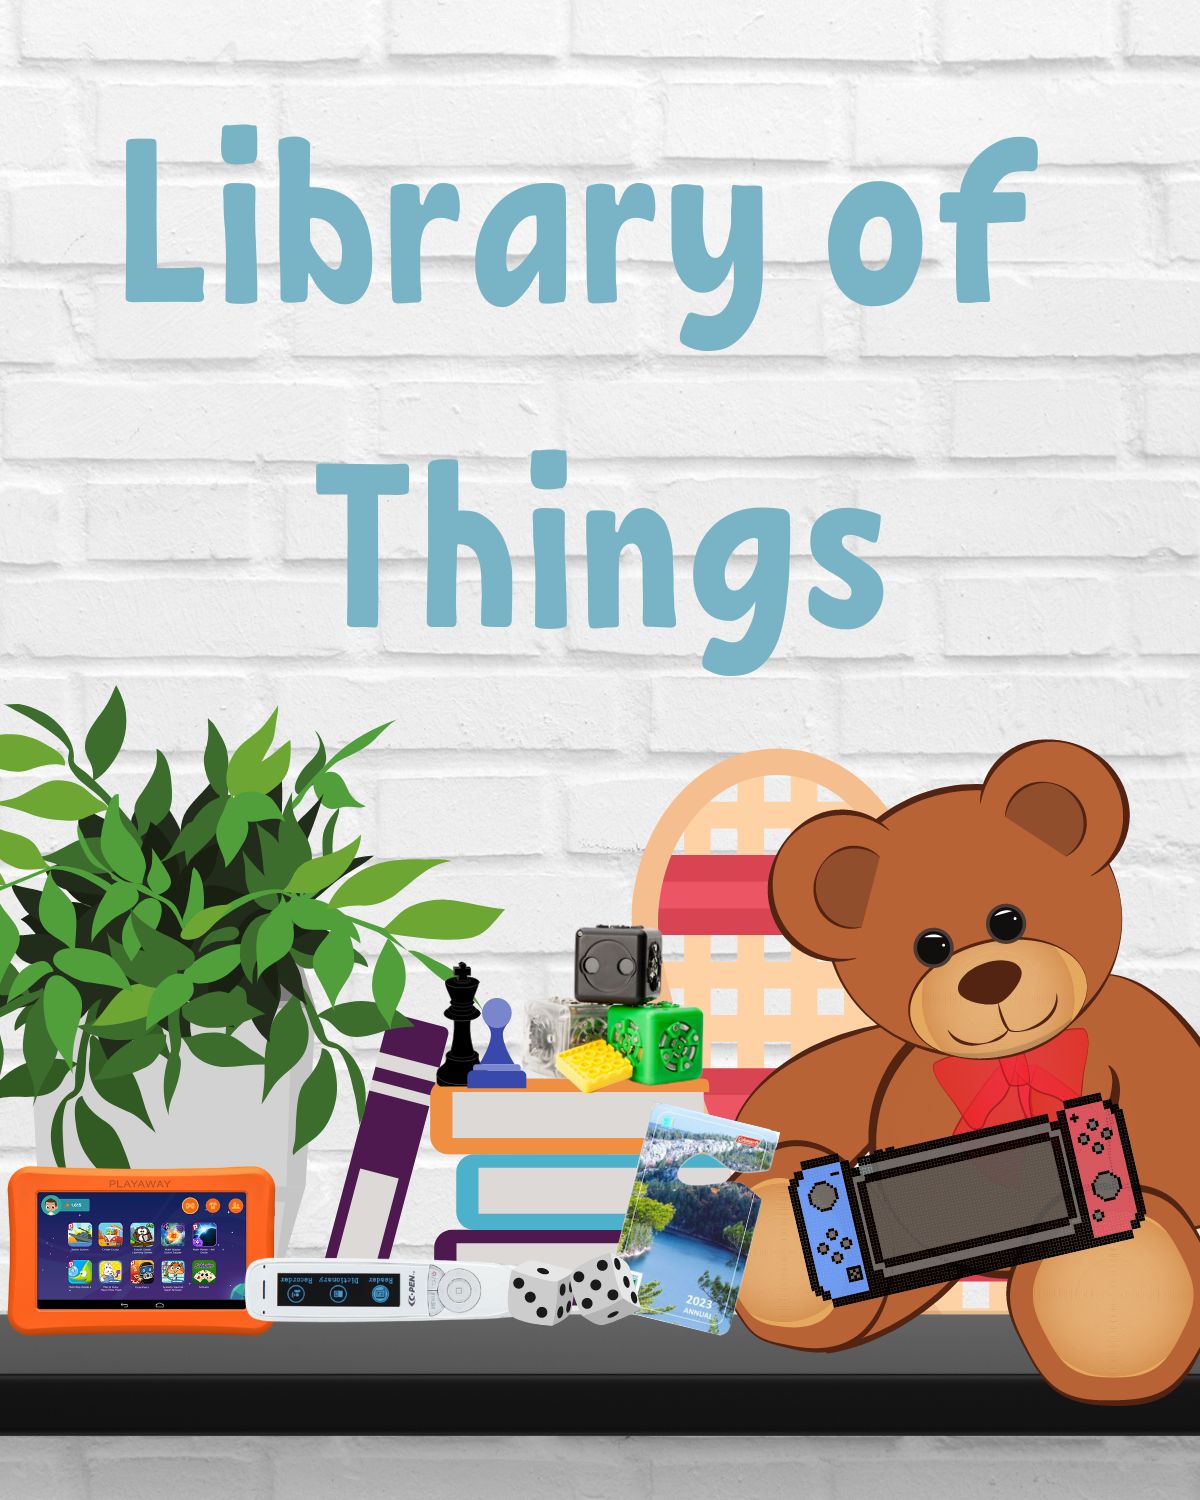 "Library of Things" - a shelf with items in PEPL's special collections on it like a Nintendo Switch, snowshoes, Cubelets and more!